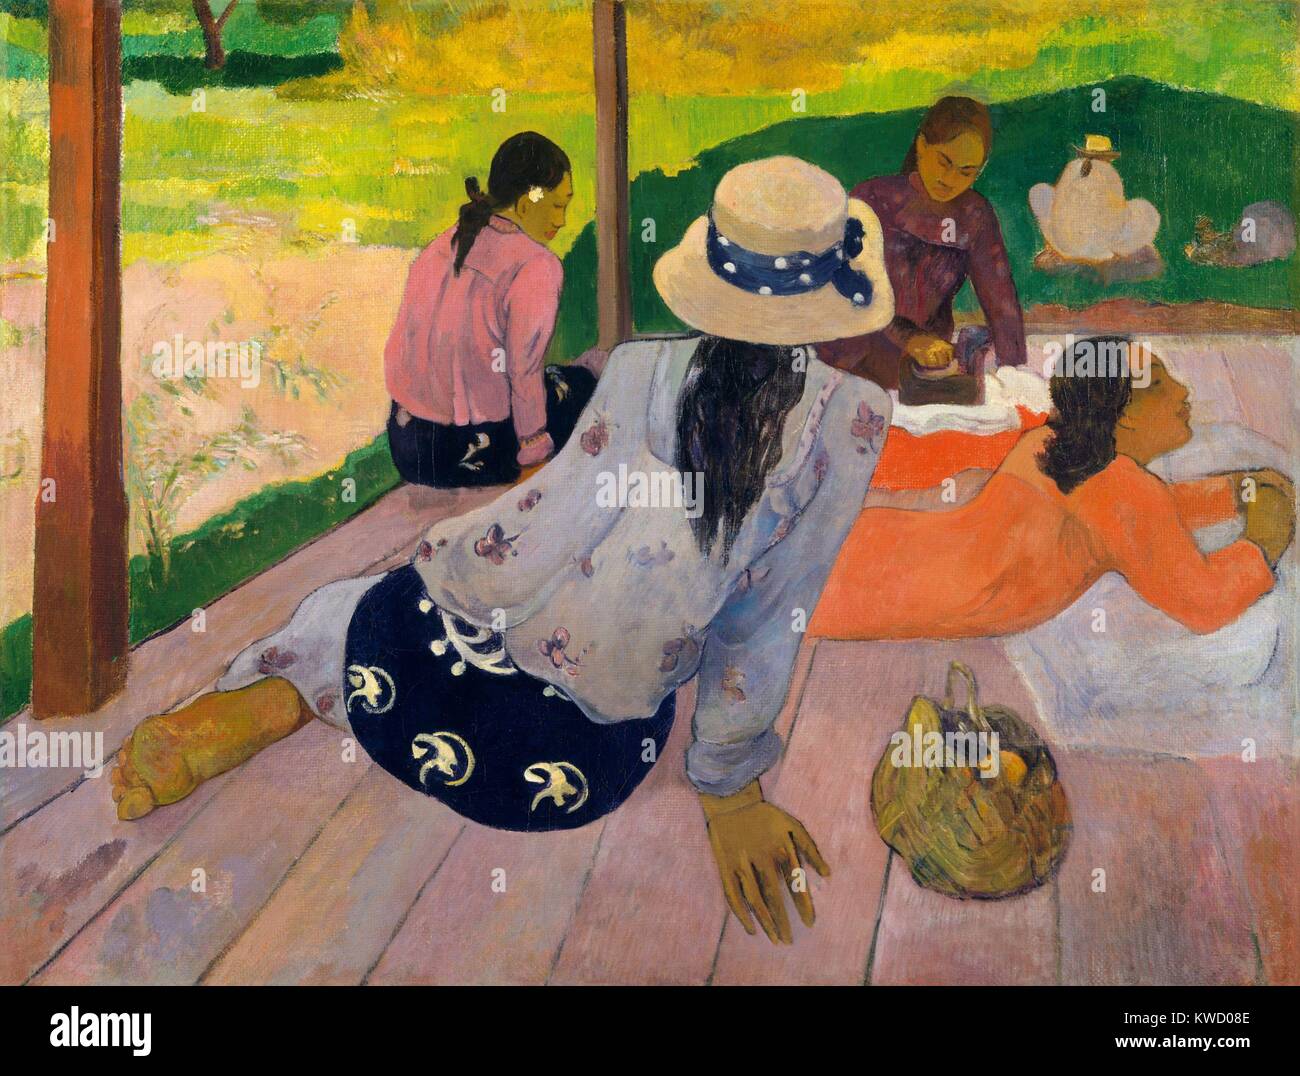 The Siesta, by Paul Gauguin, 1892-94, French Post-Impressionist painting, oil on canvas. Tahitian women gathered in an open-sided shelter with wood plank floor (BSLOC 2017 5 32) Stock Photo